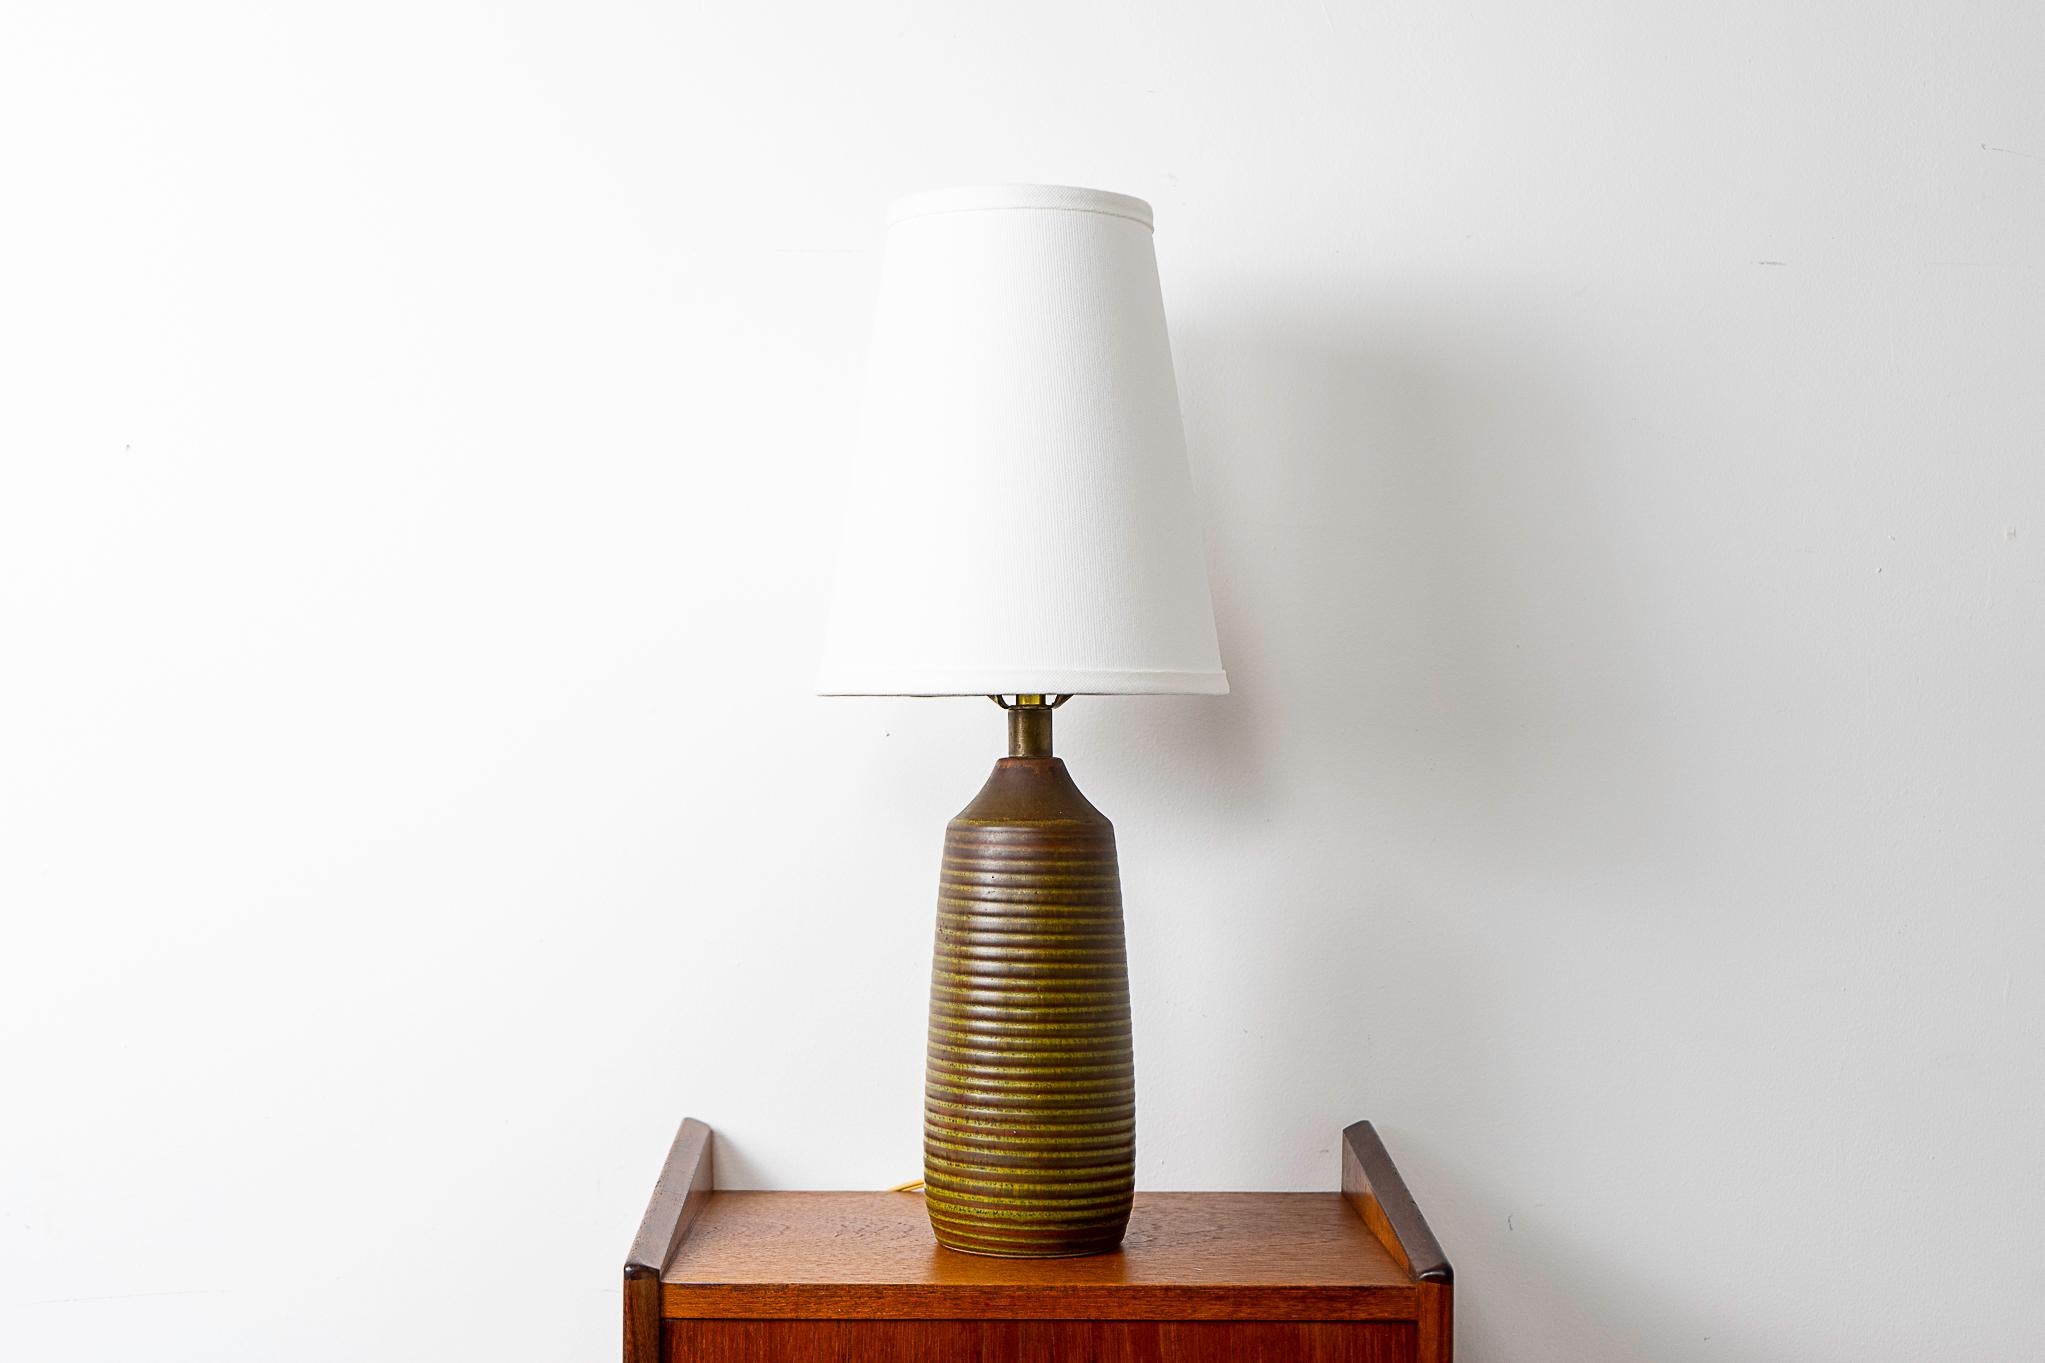 Ceramic table lamp by Lotte & Gunnar Bostlund, circa 1960's. The lovely earth tone glaze with dramatic rings pairs perfectly with the custom canvas textured shade. Excess cord slack can be neatly tucked away inside the lamp base. Use a trilight bulb